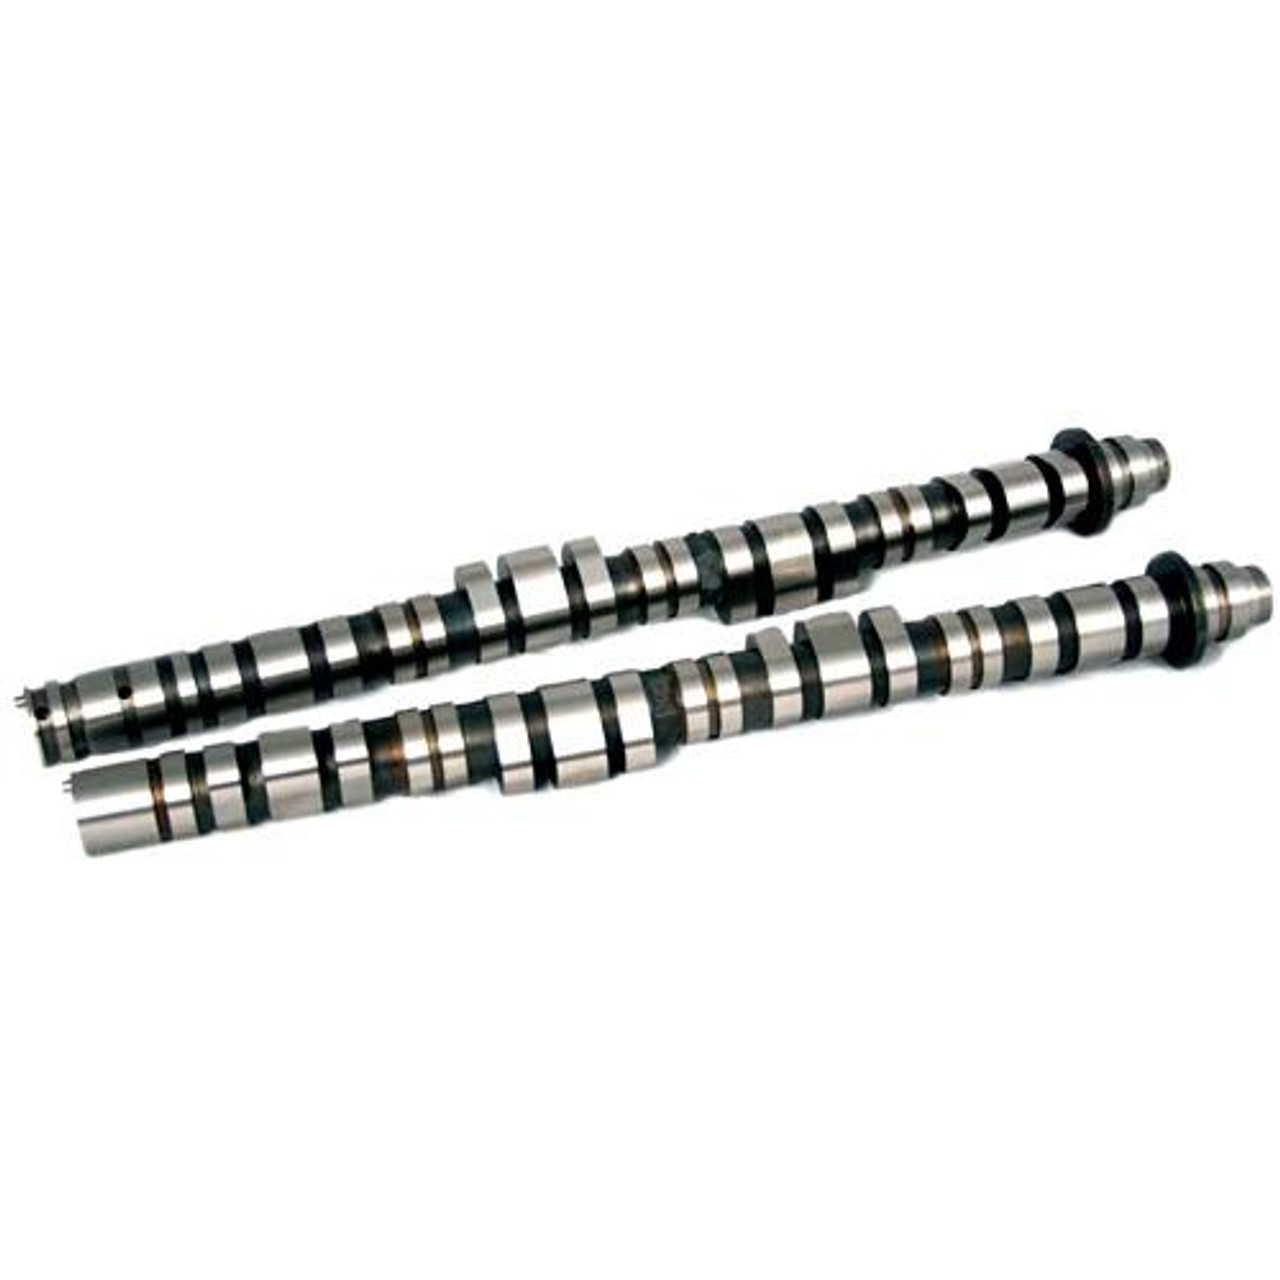 Tuner Series Camshafts; Race Only